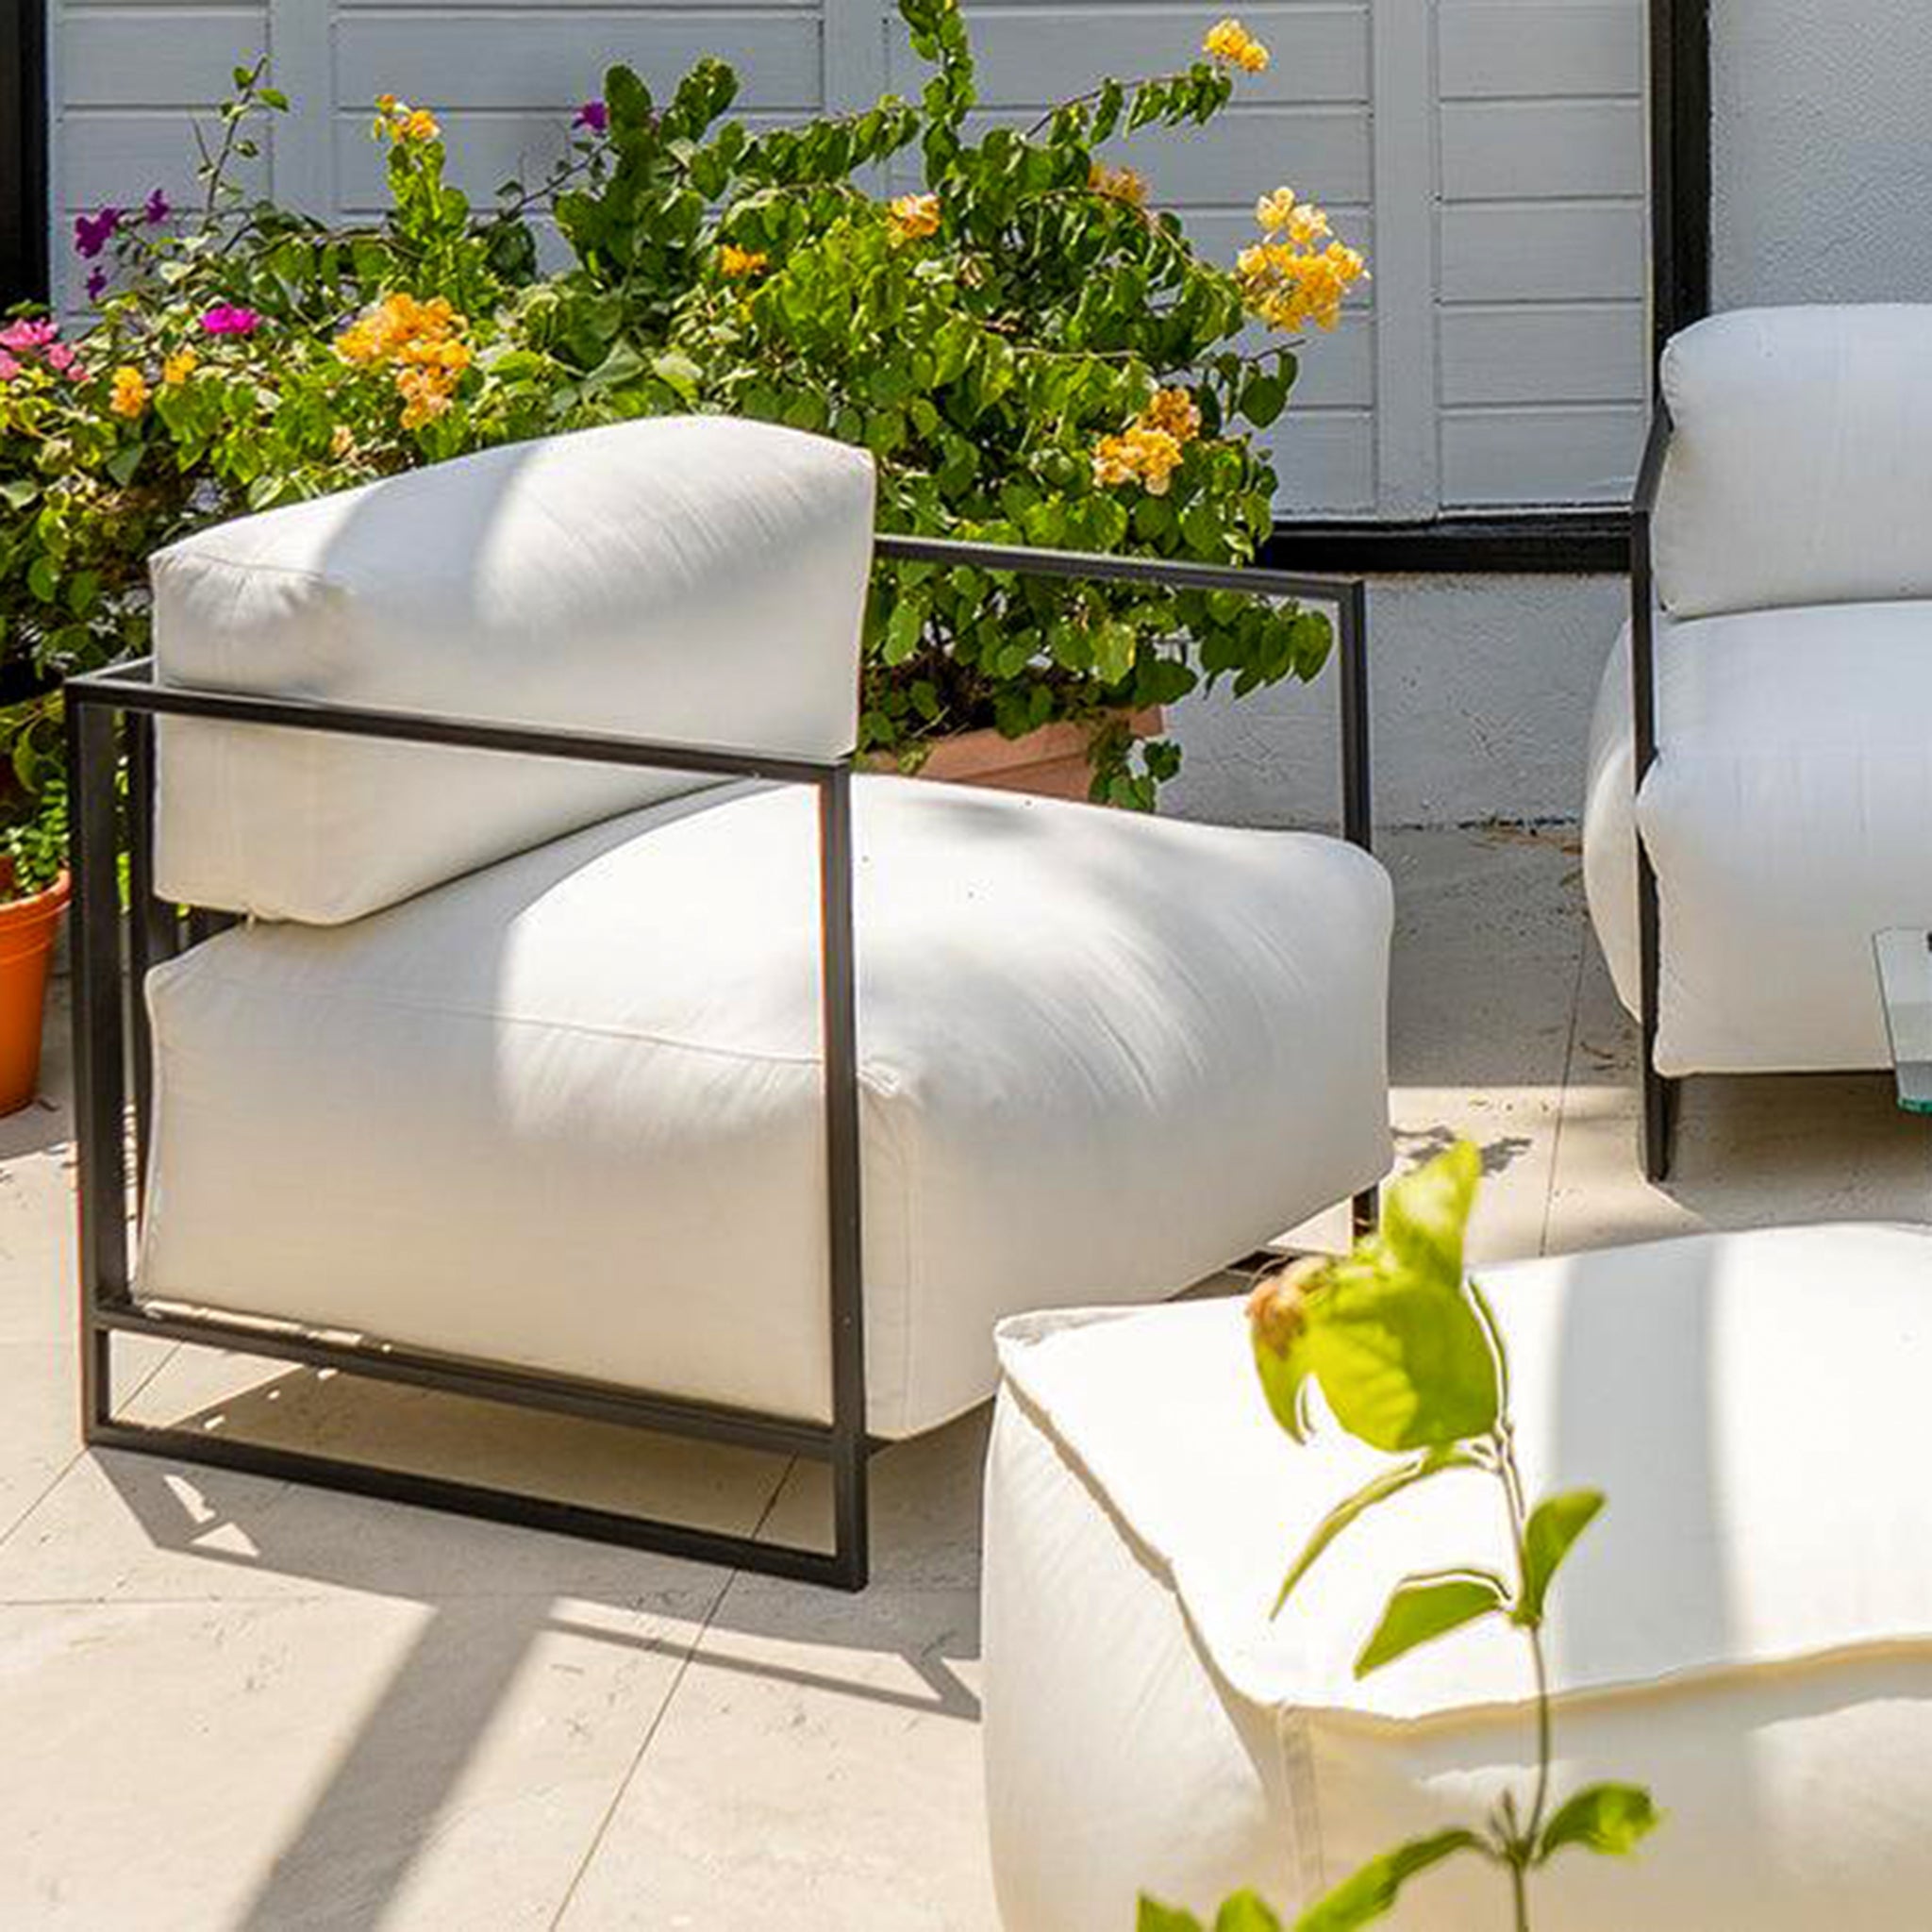 Sunny patio scene featuring The Dexter Accent Chair with white cushions and black metal frame, surrounded by vibrant potted plants and greenery.